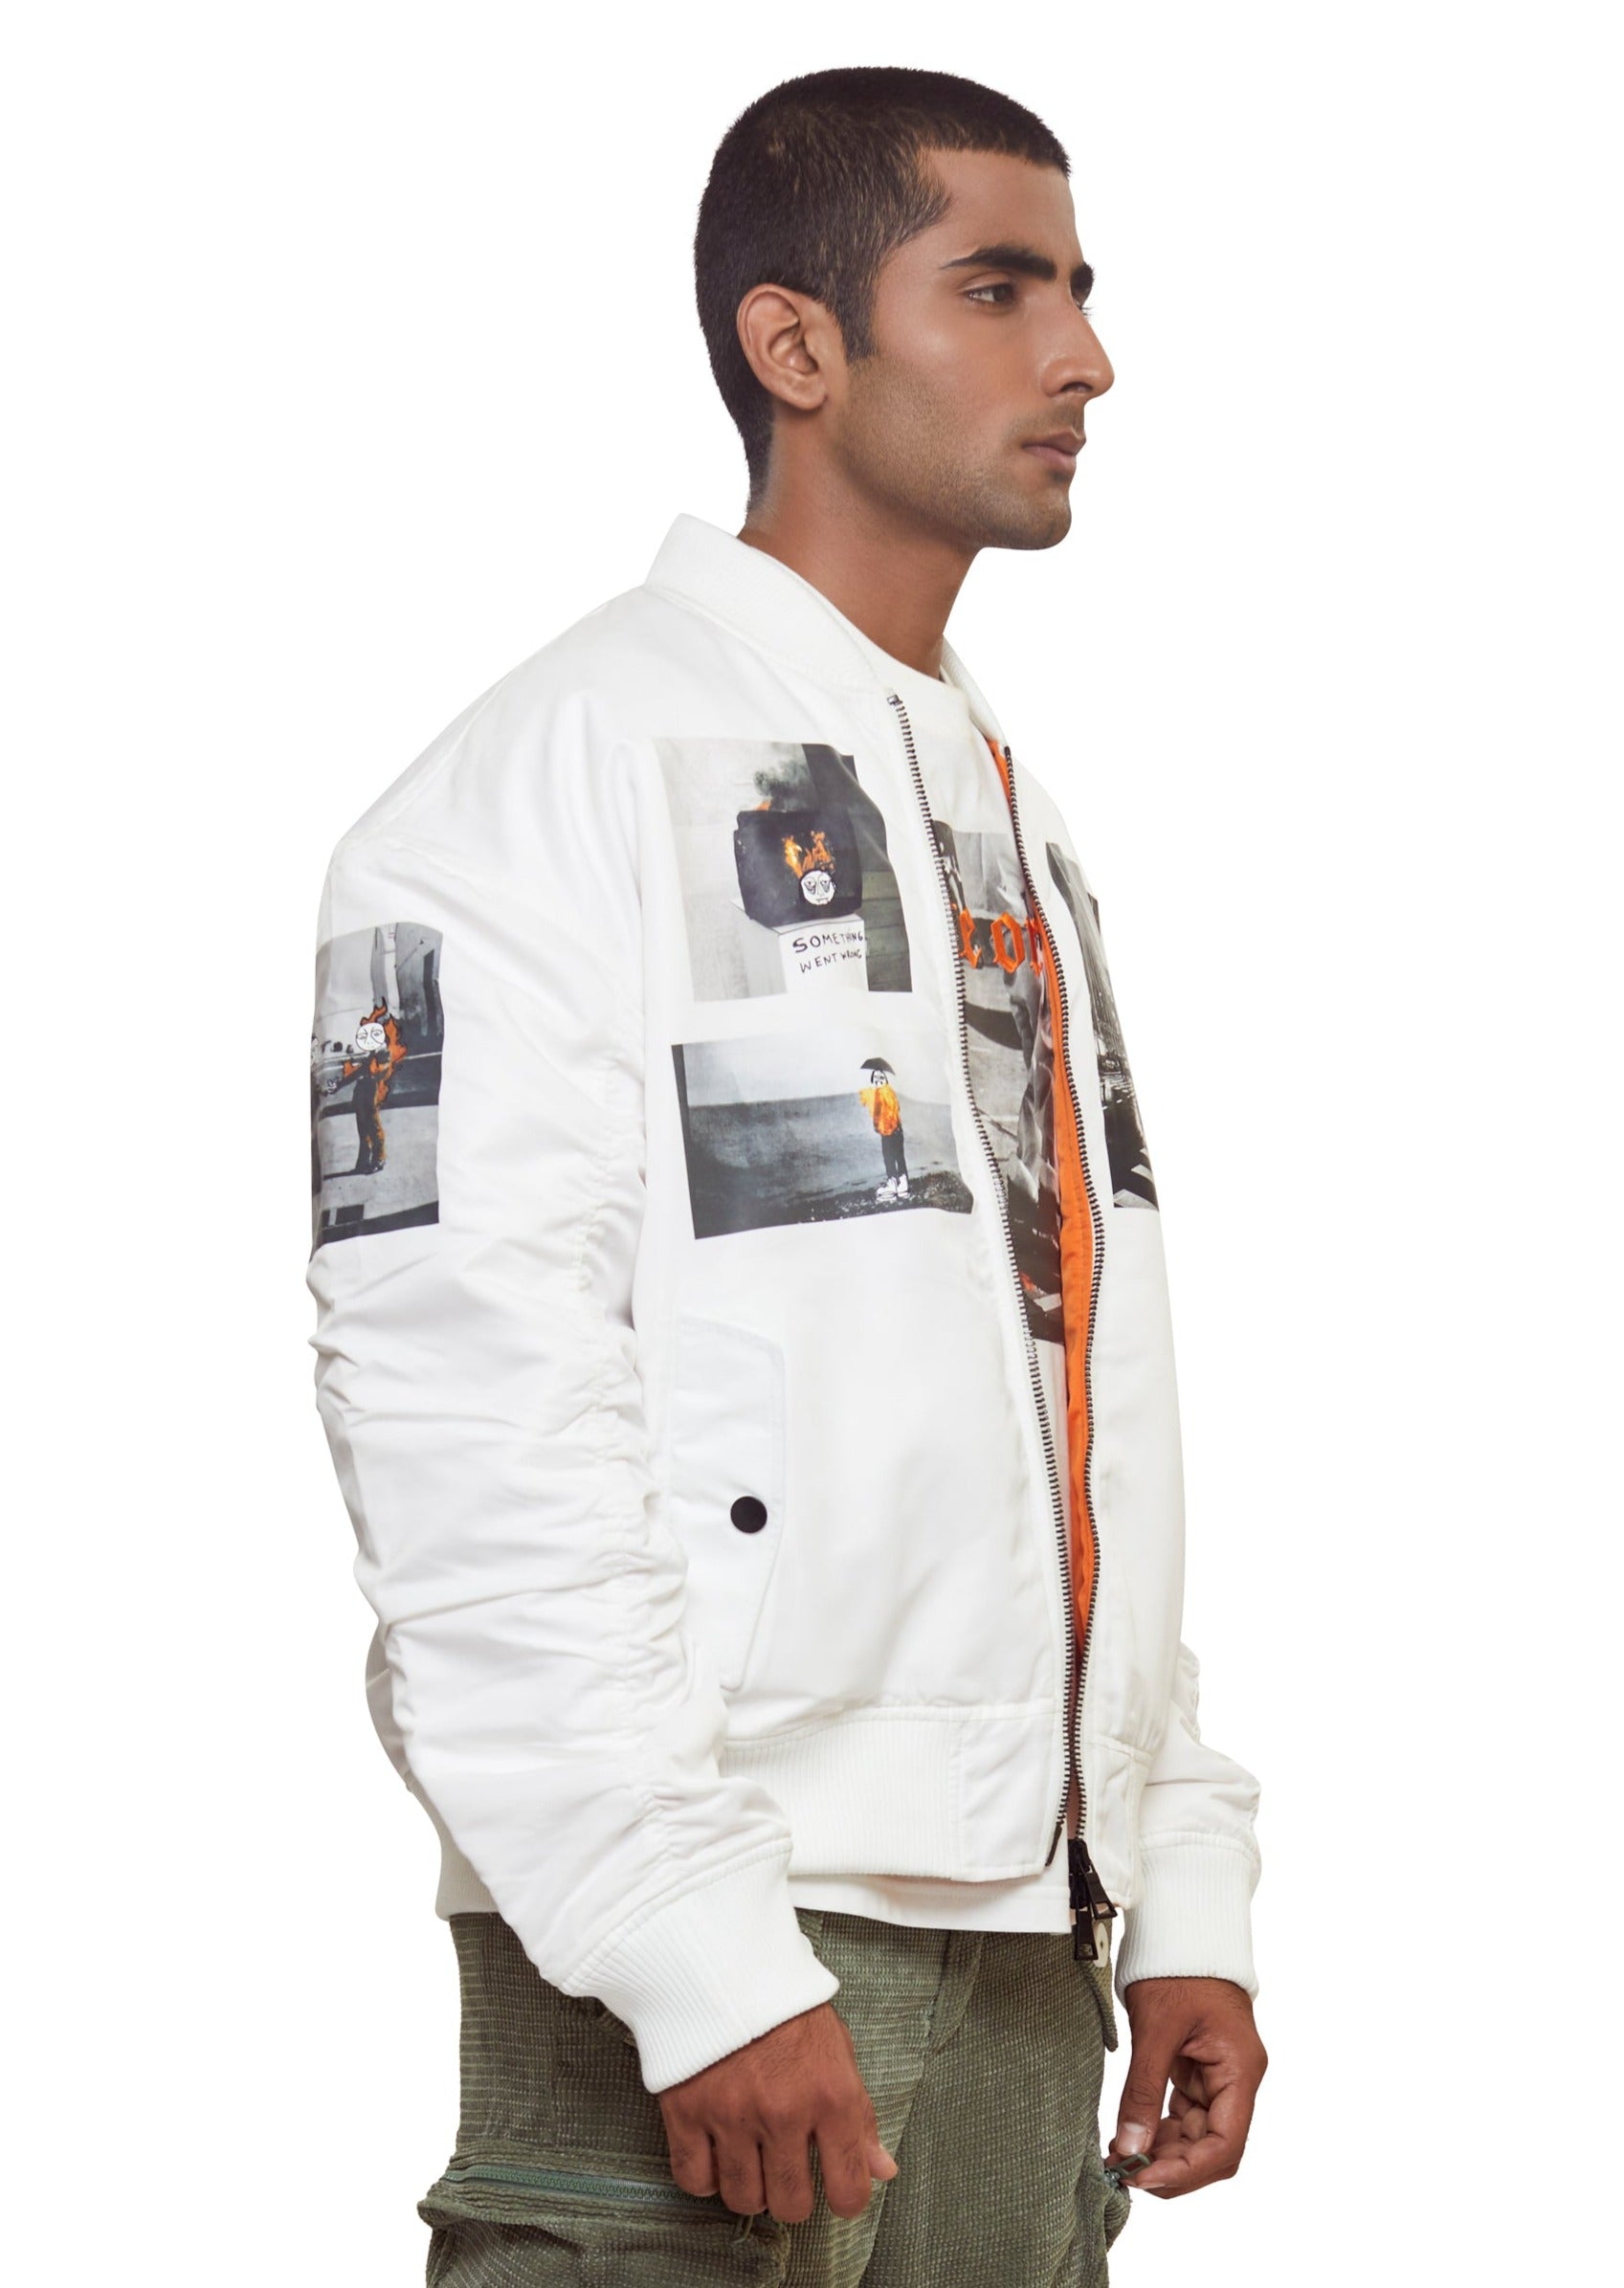 White Long-sleeved Drop shoulder Embroidered and Printed Bomber jacket from the brand Haculla